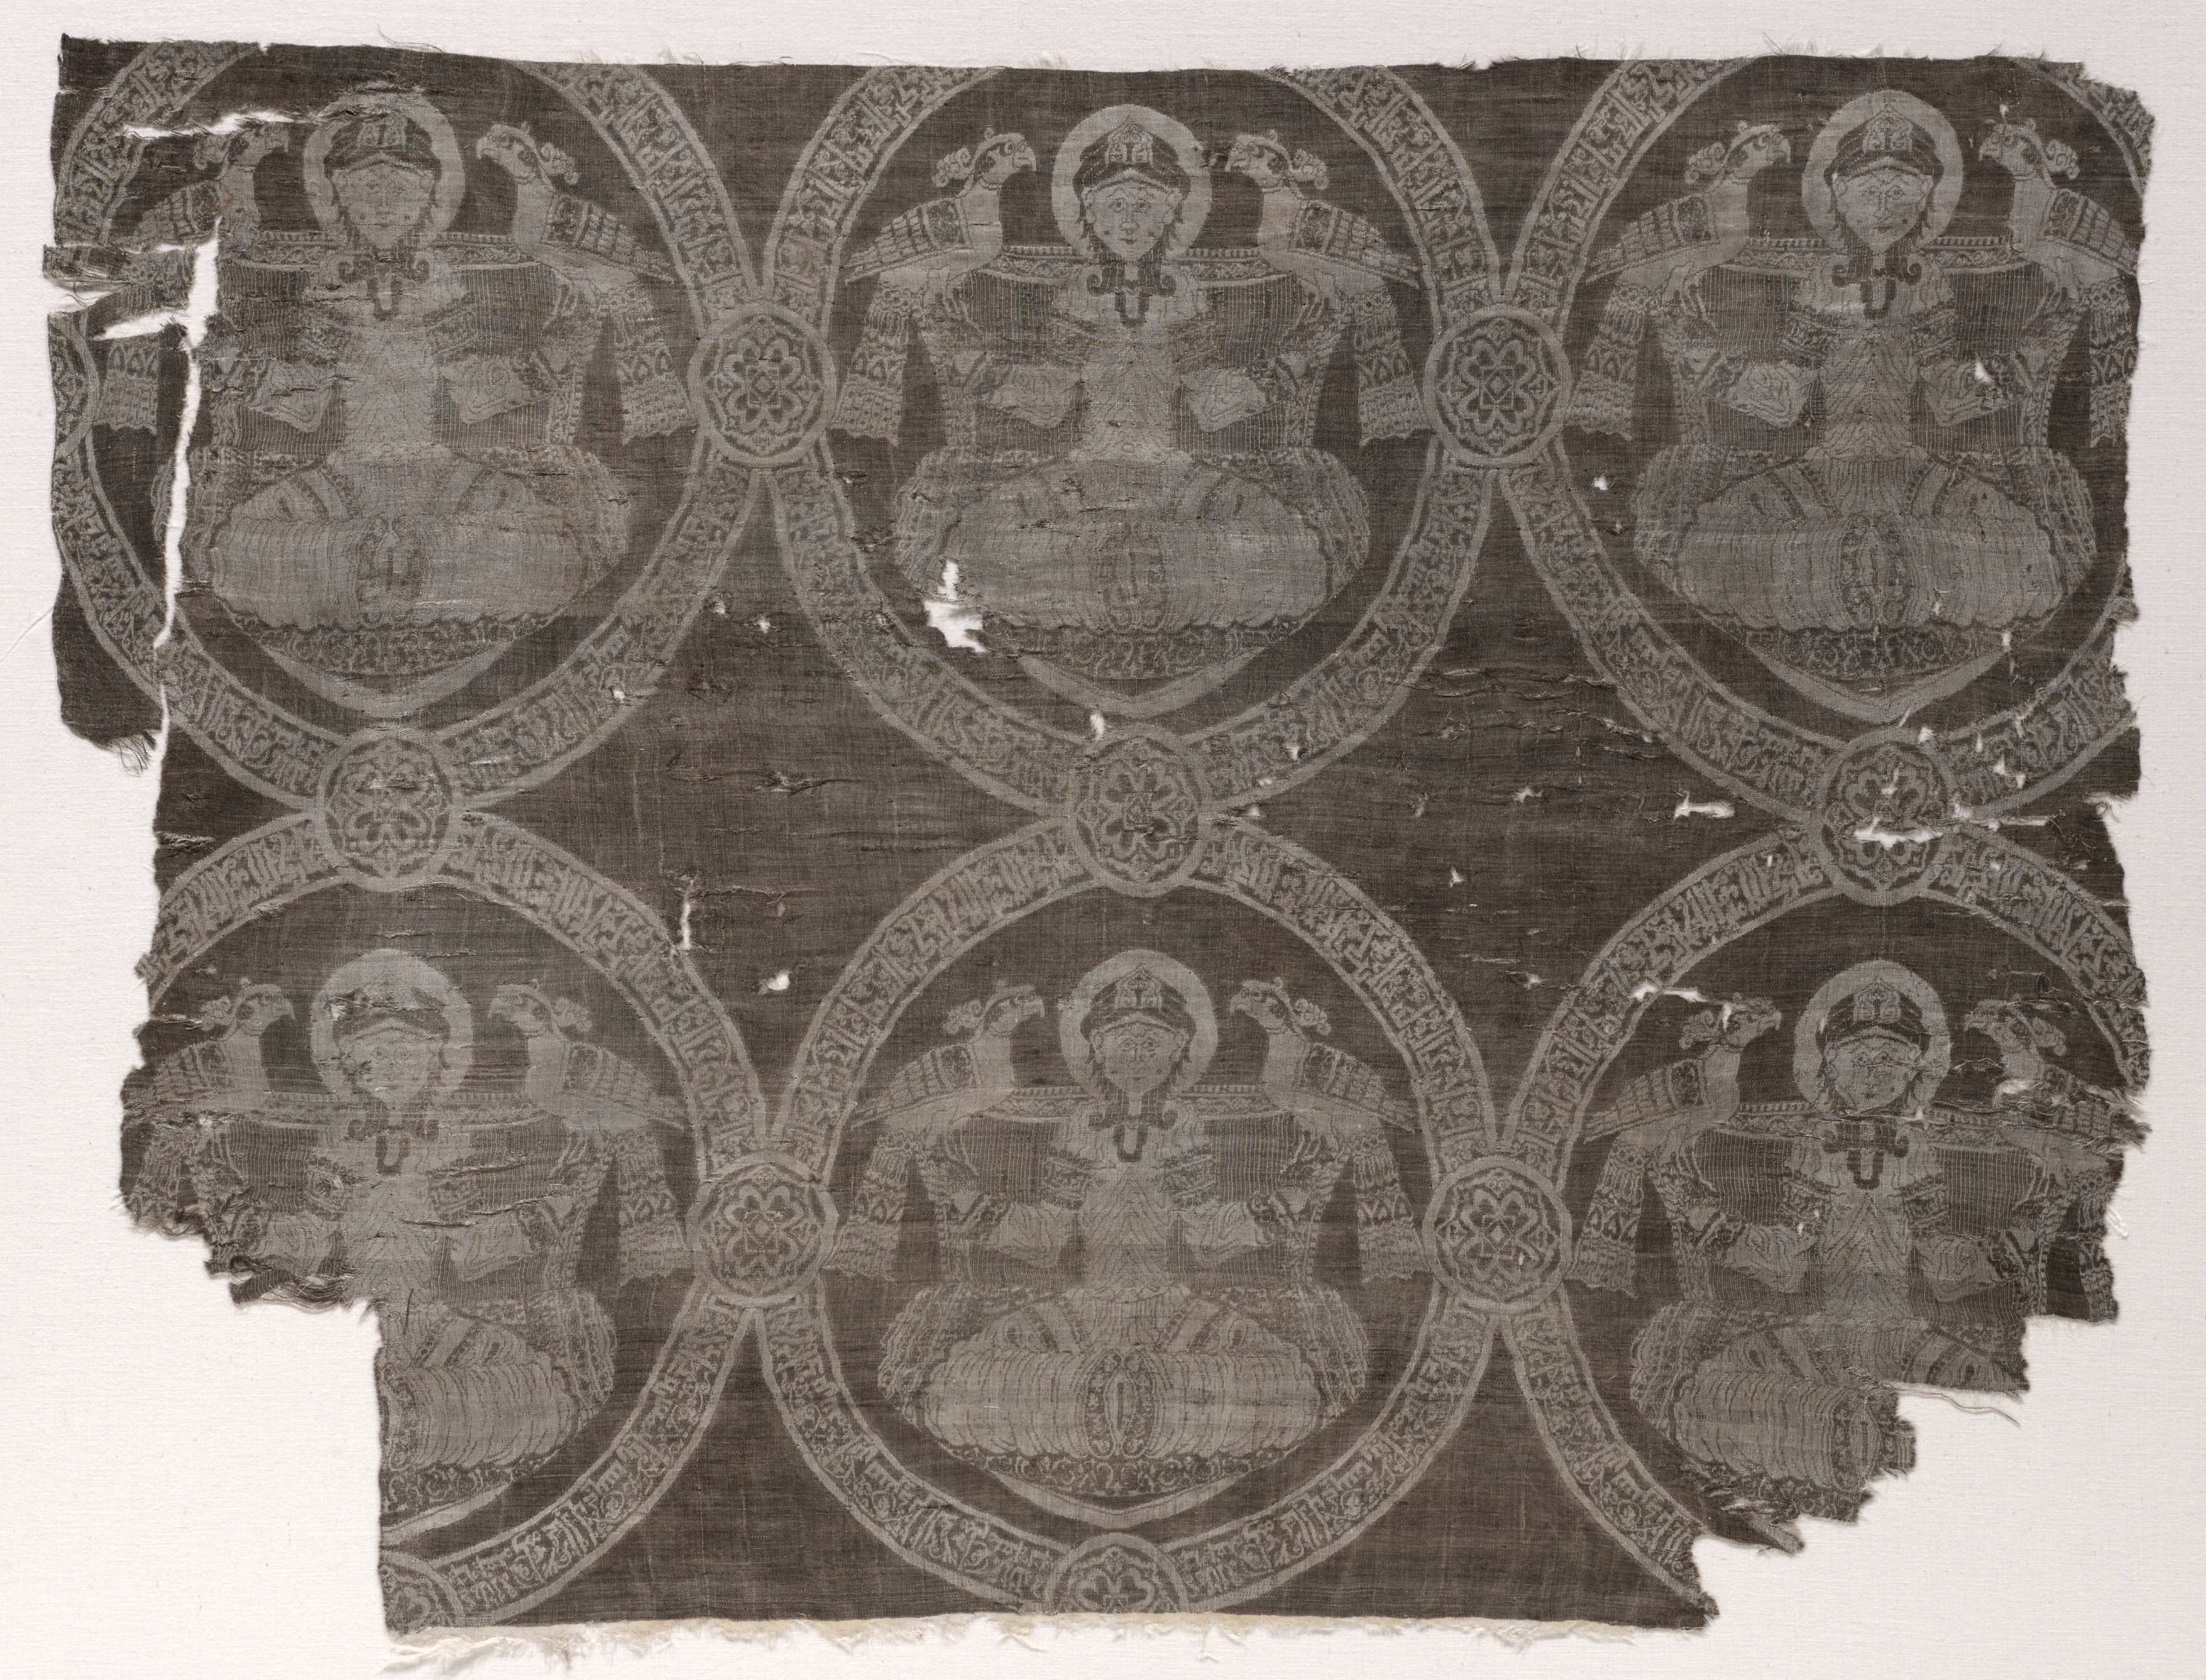 Fragment with seated prince holding falcons in kufic medallions